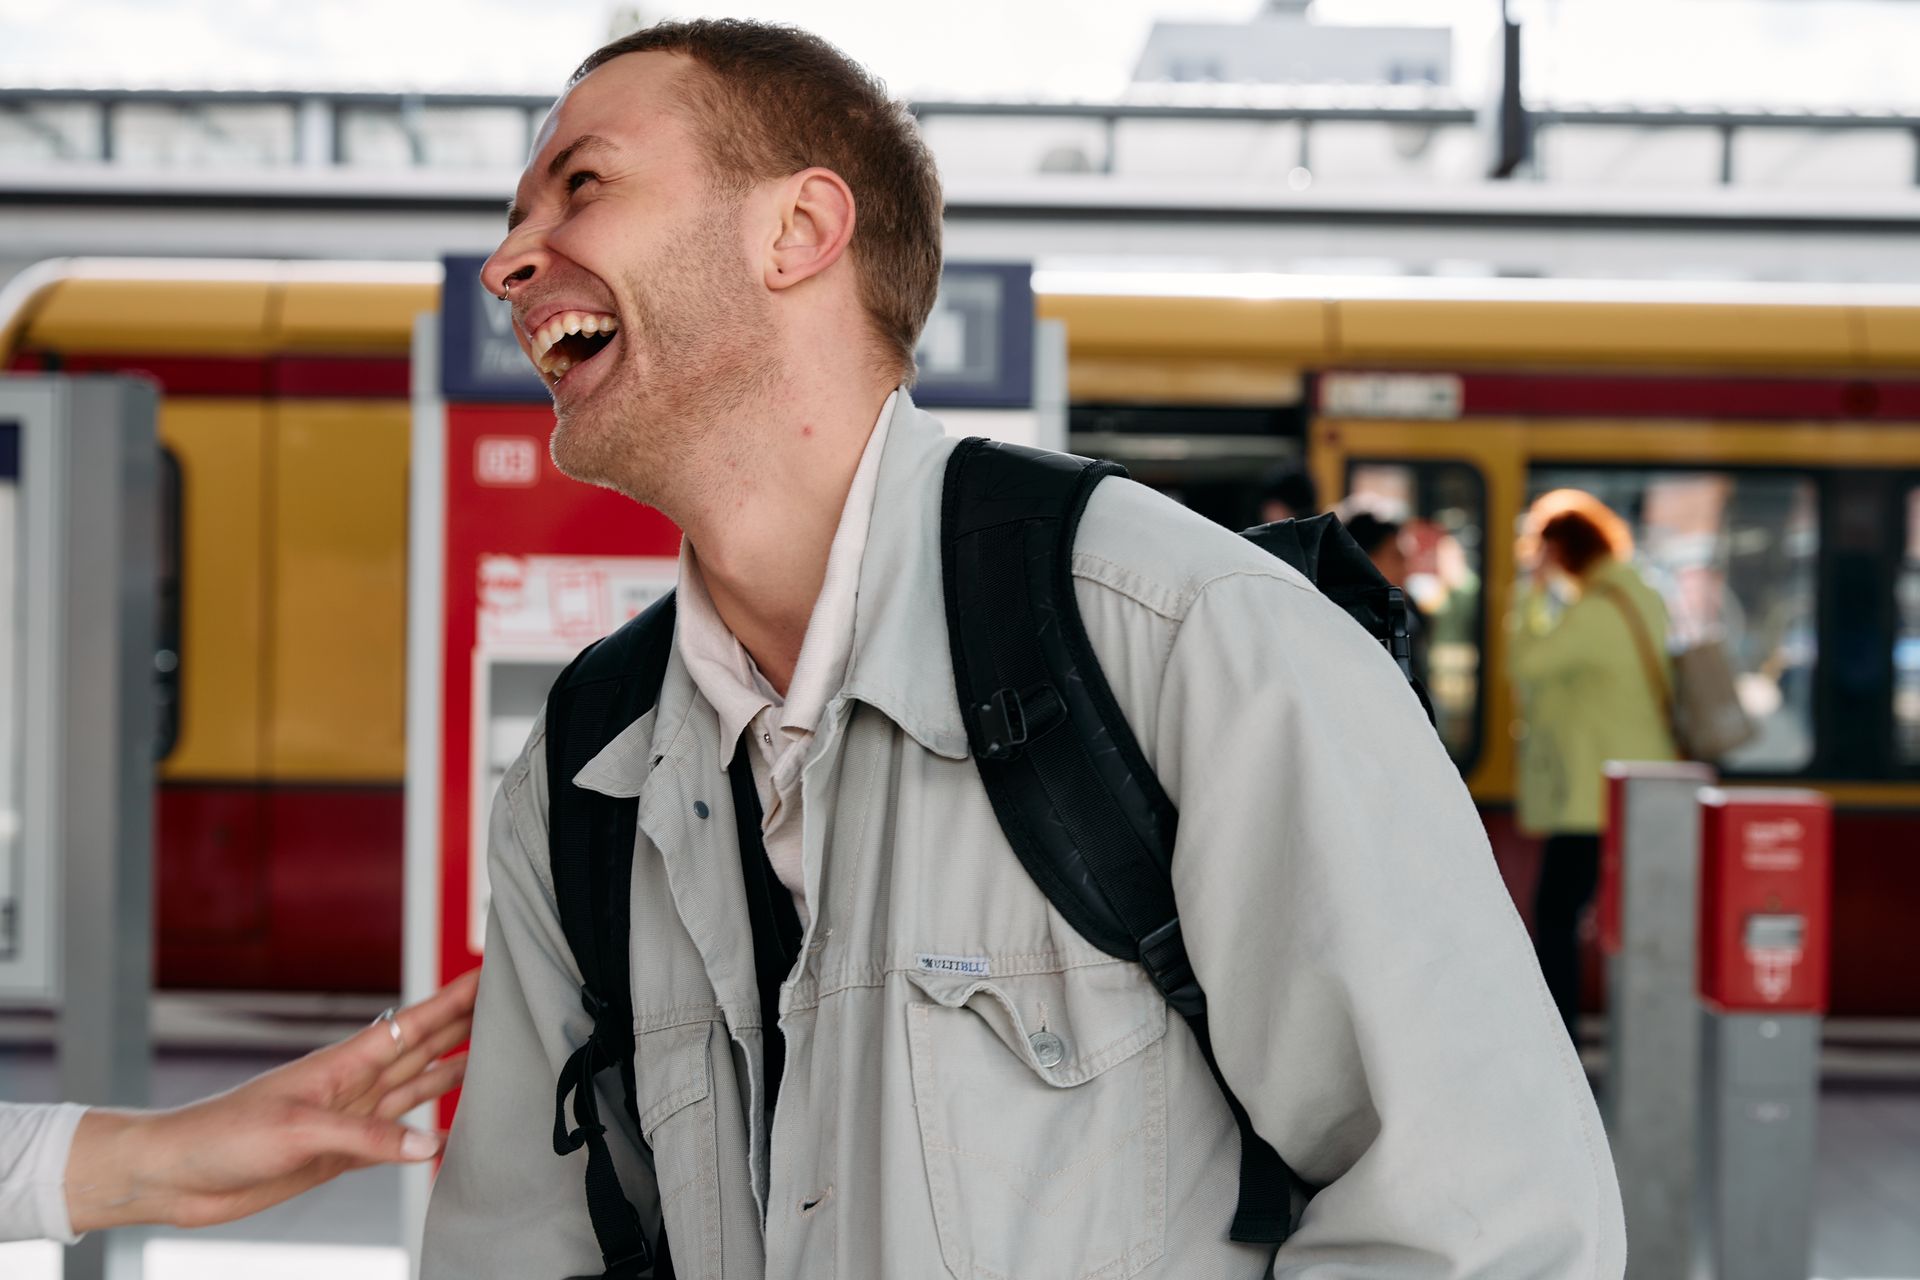 A young man stood in front of a busy train platform laughs as he pays at a ticket booth.